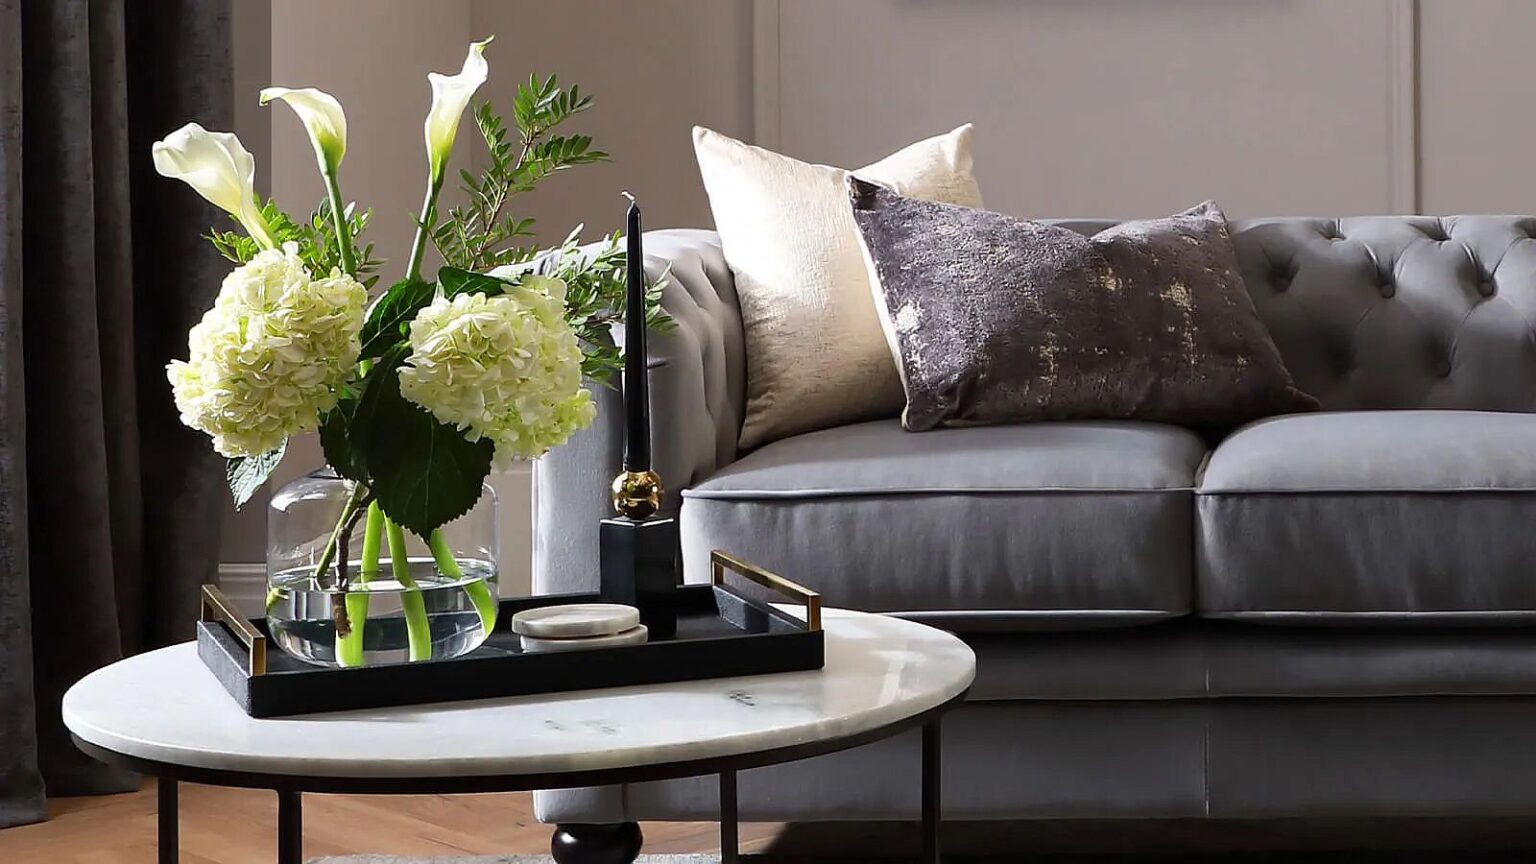 Blog - Style your Coffee Table likd a Pro